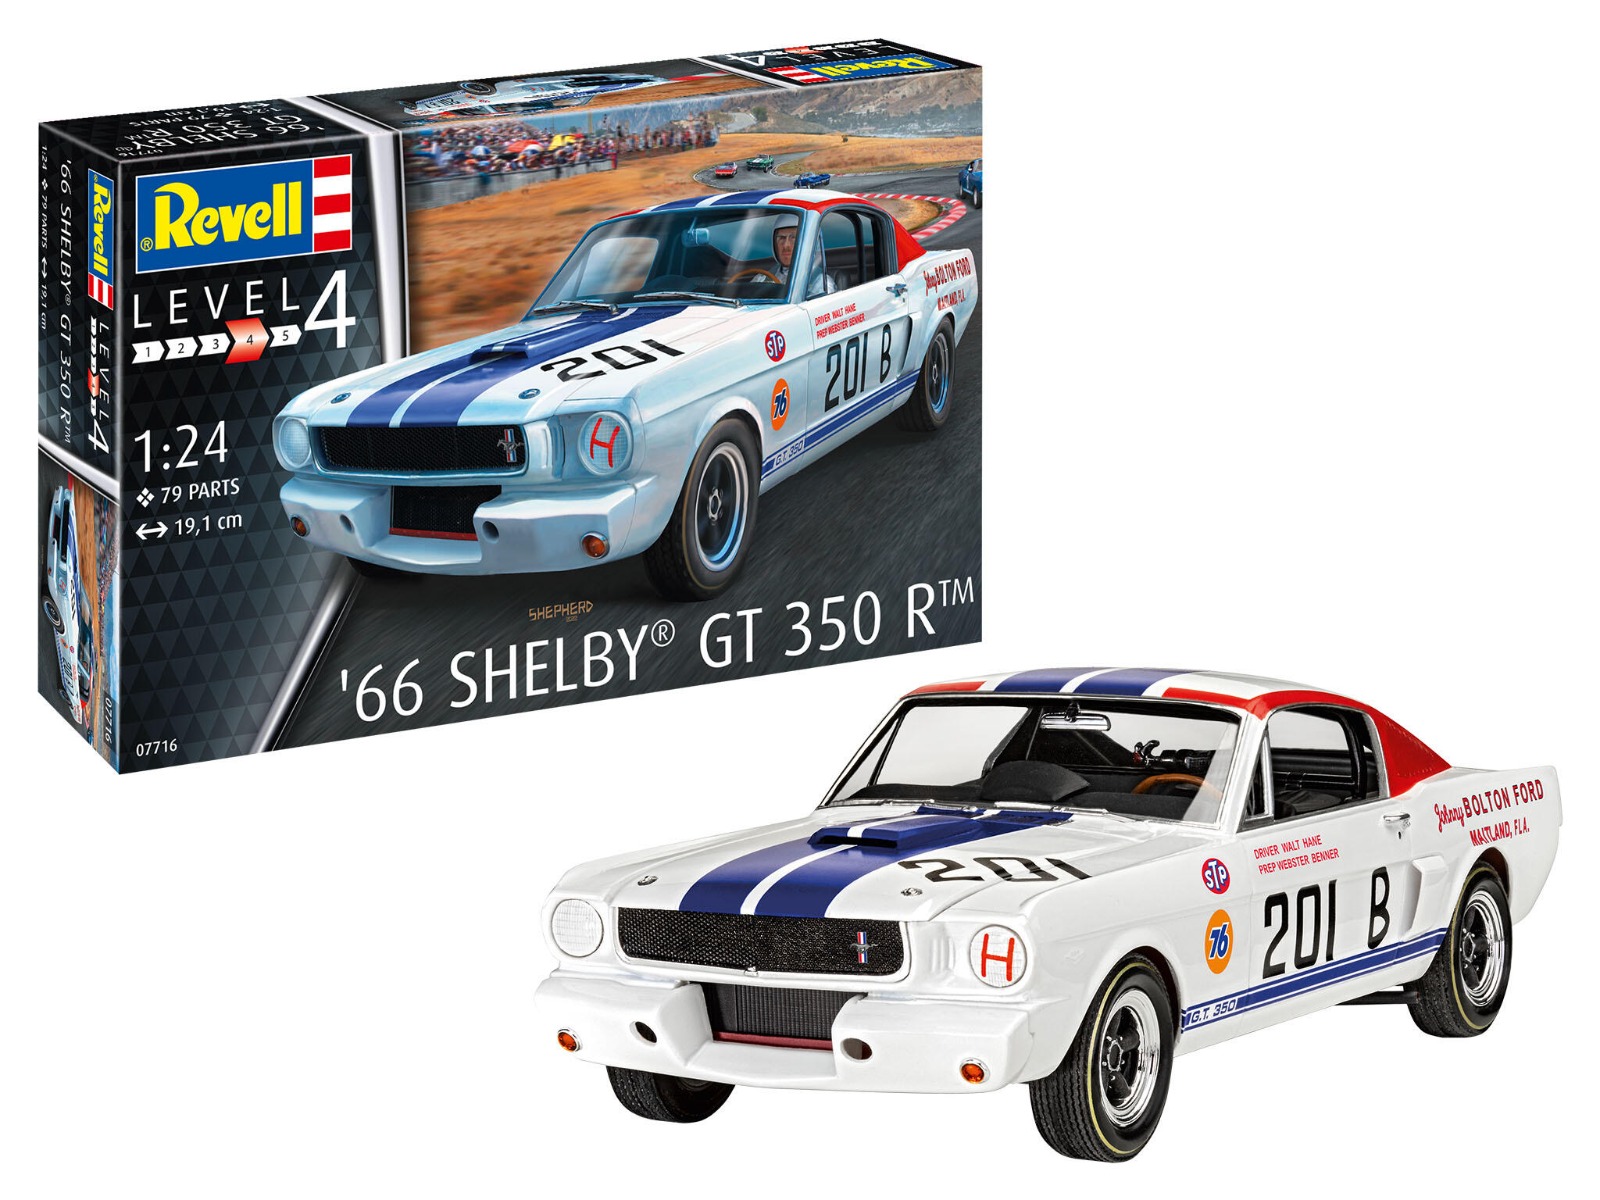 1:24 Revell 07716 1965 Shelby GT 350 R Auto Plastic kit